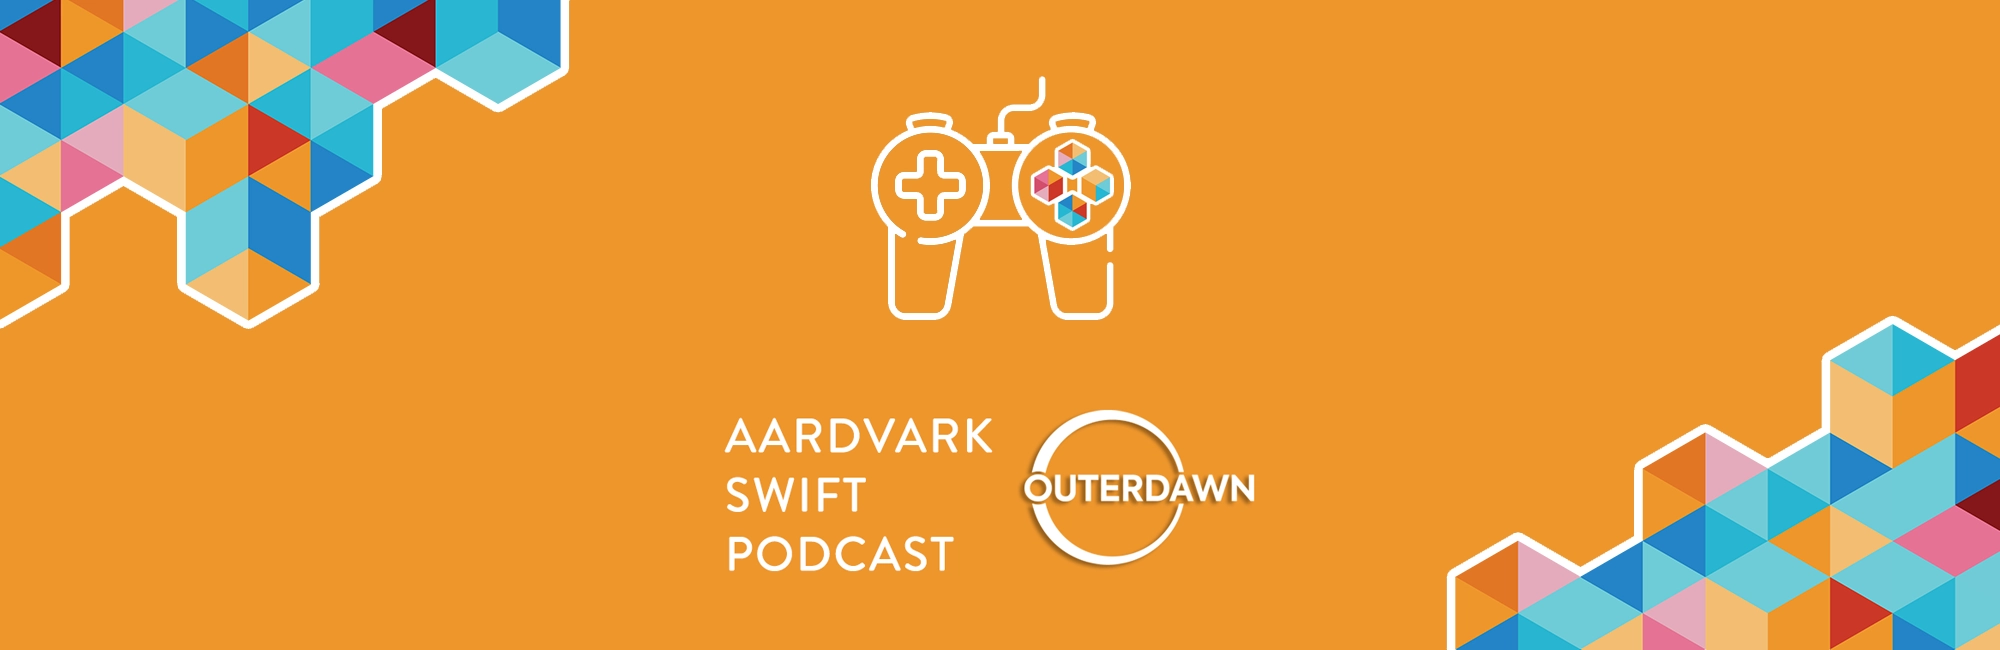 Game Dev Podcast   Outerdawn